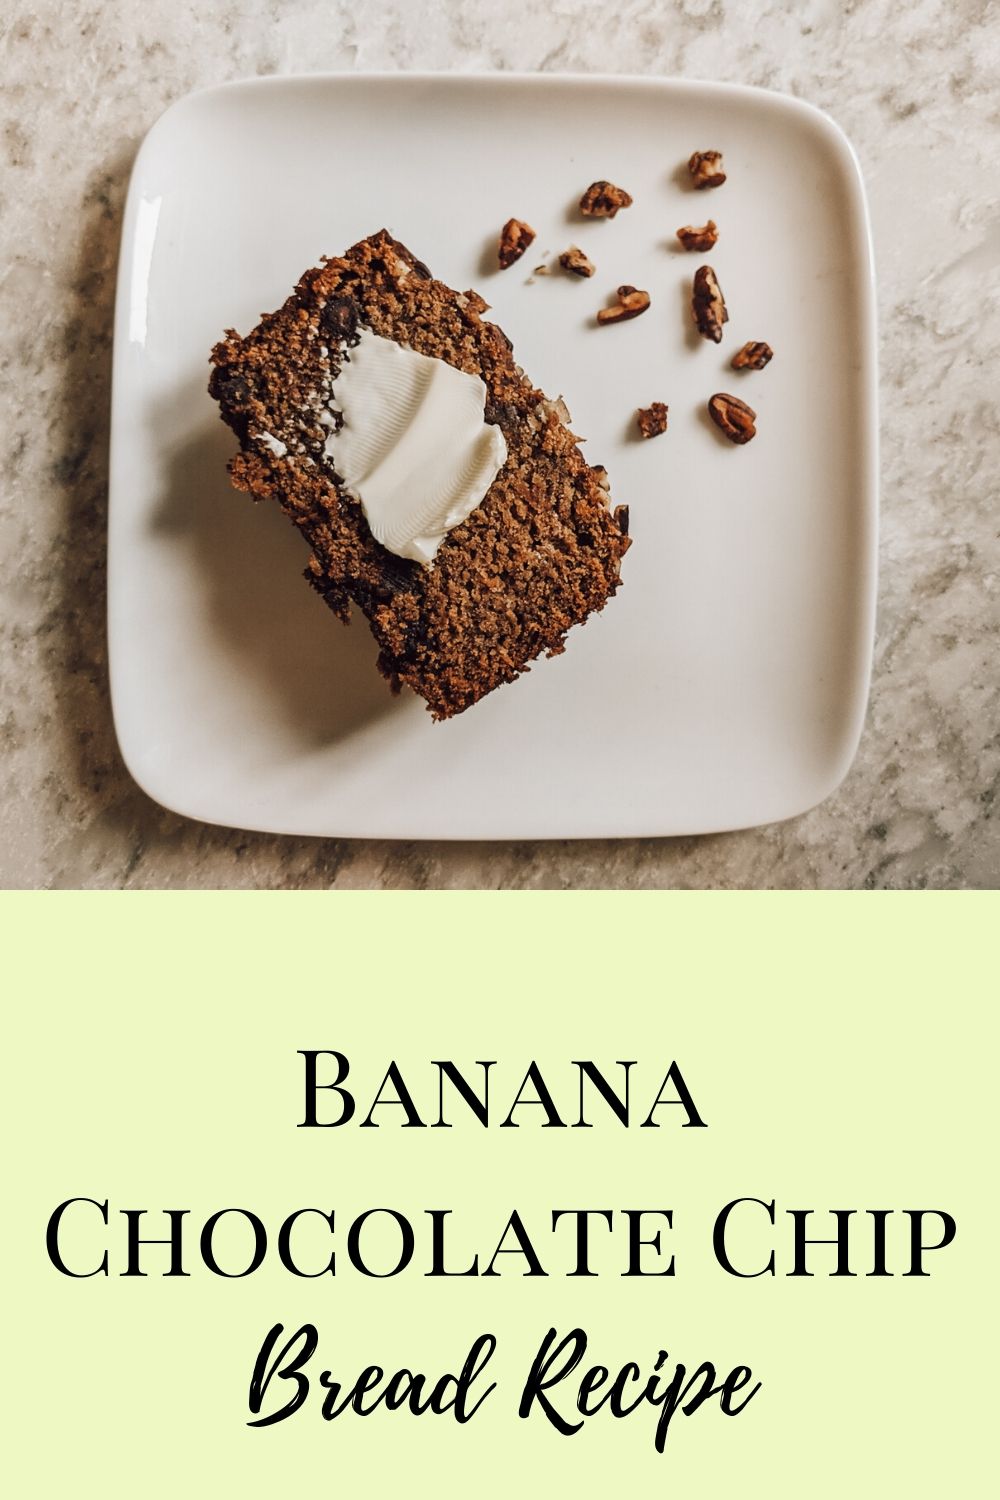 Try This Amazing and Easy Chocolate Chip Banana Bread Recipe